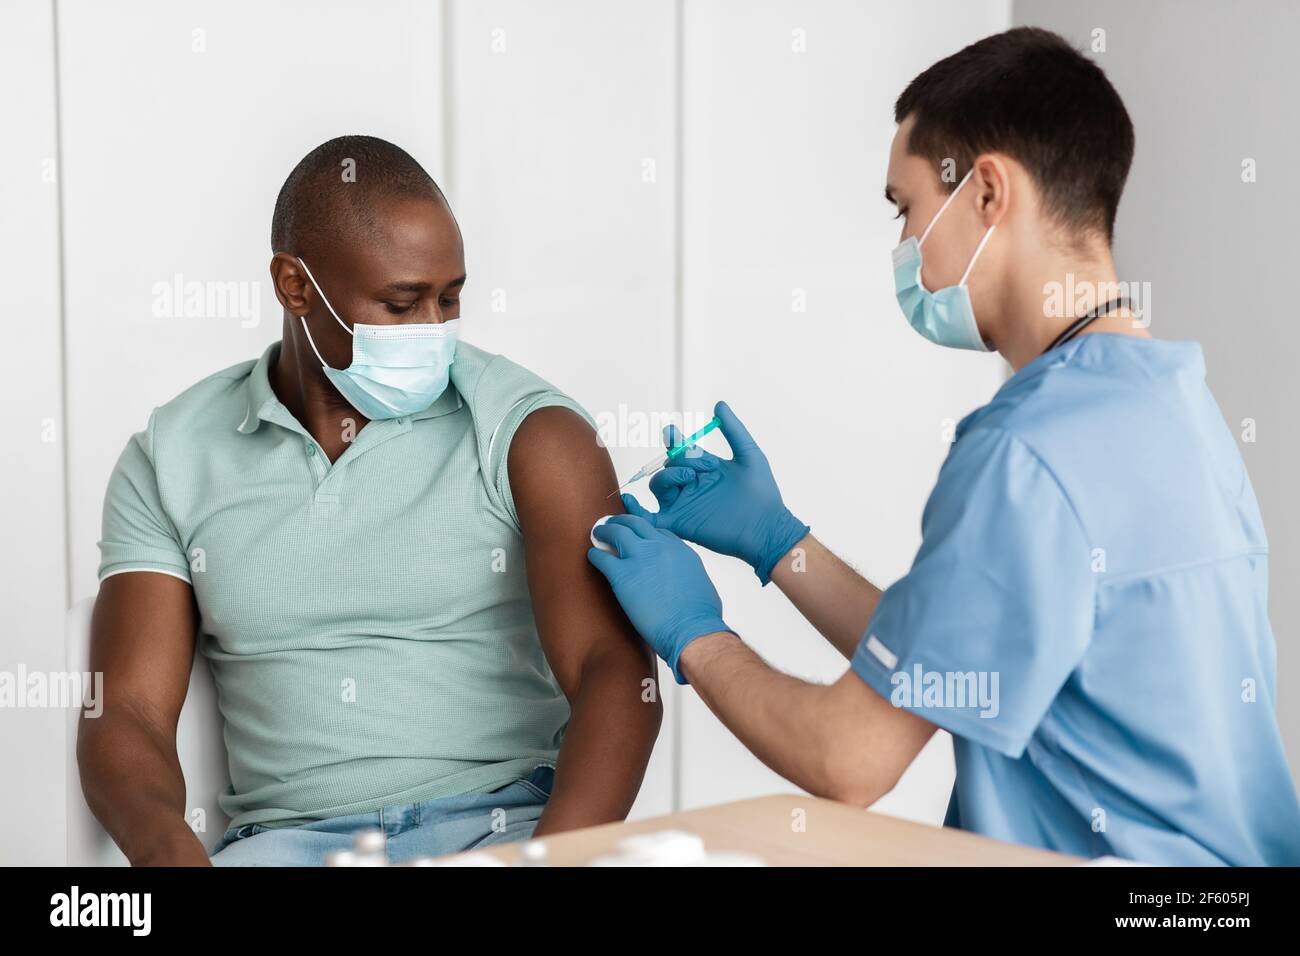 Modern medicine, global patient vaccination program and new normal Stock Photo